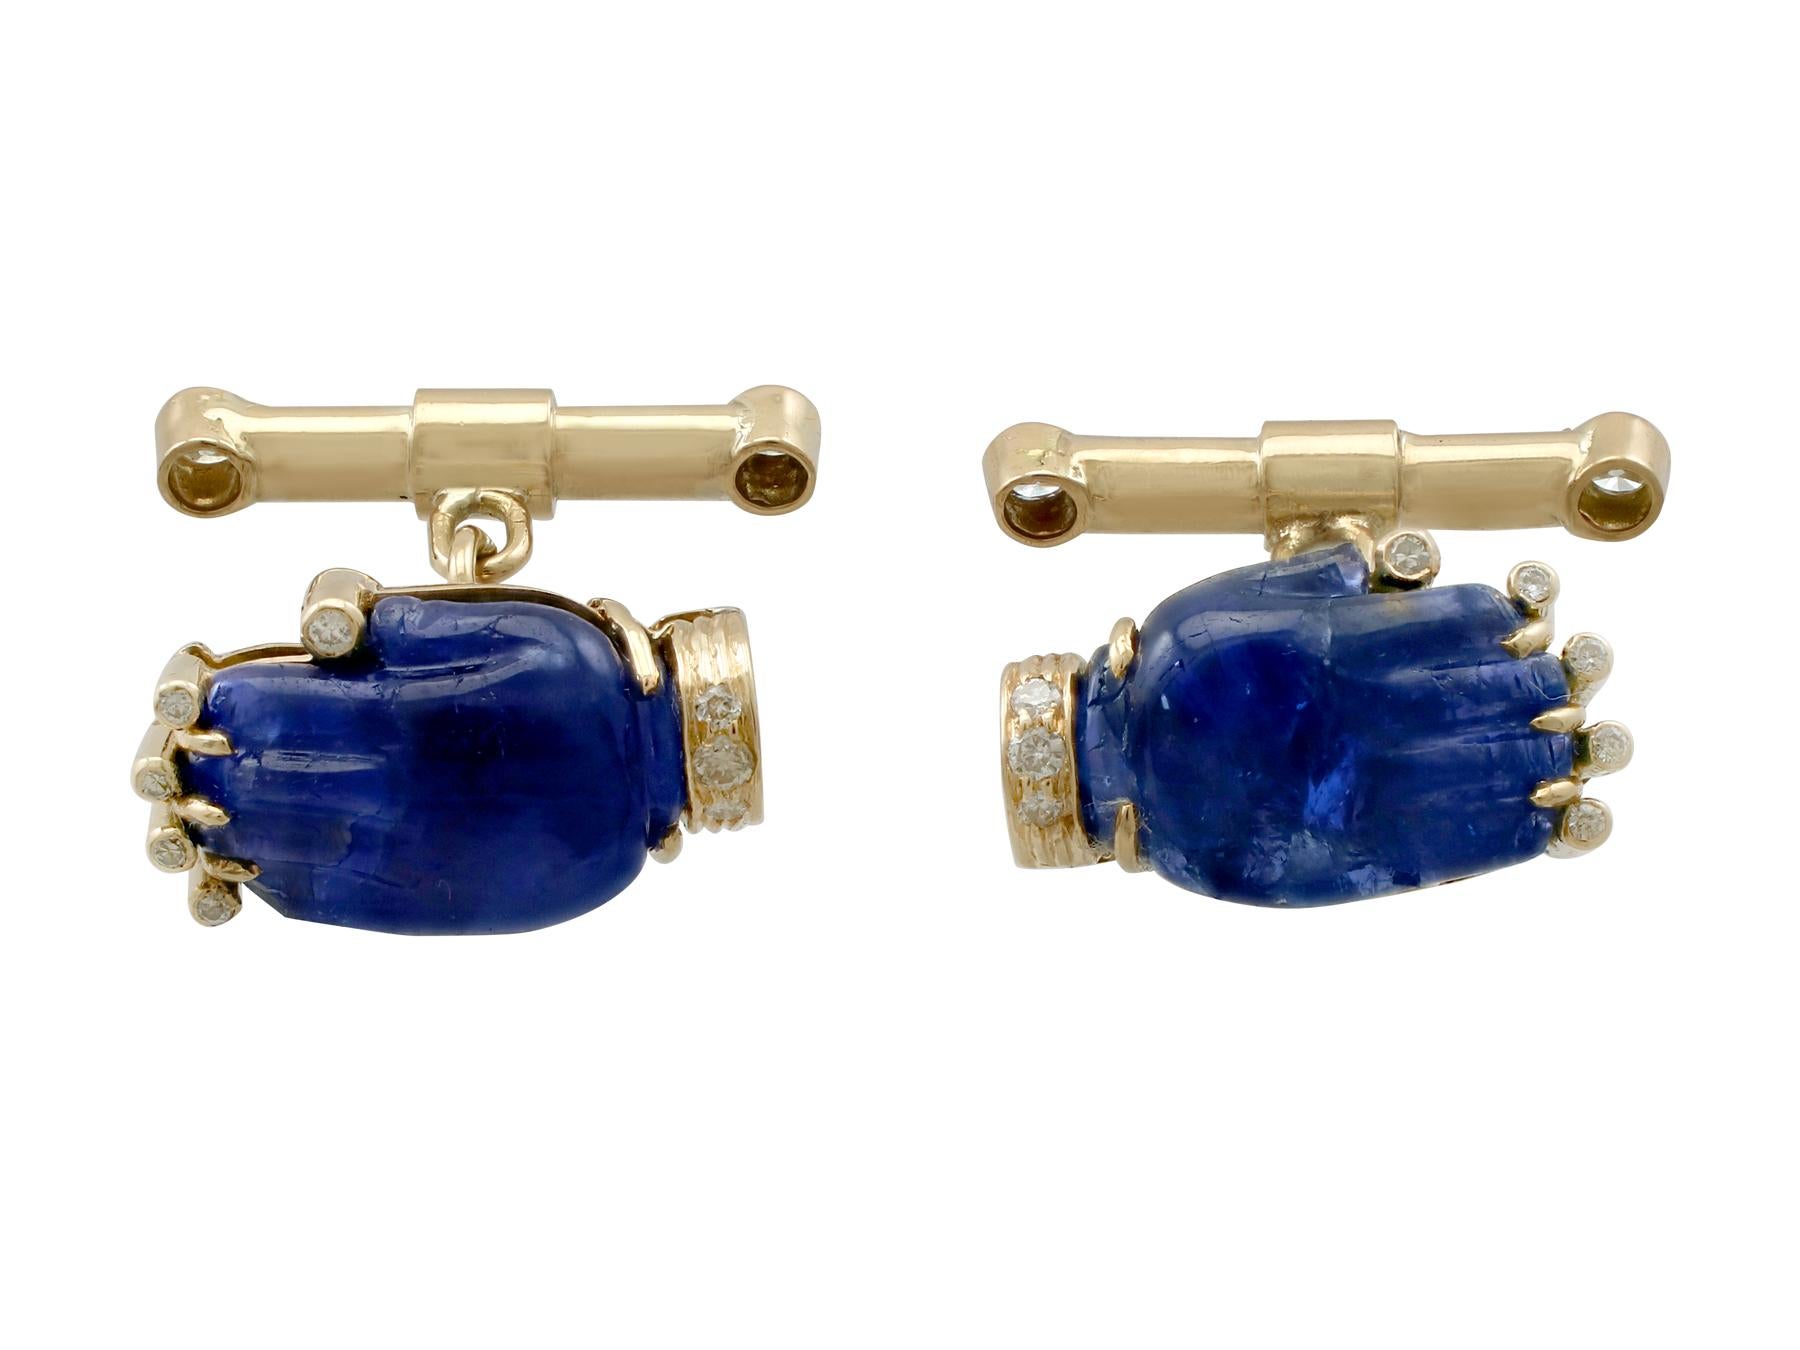 An impressive pair of vintage 8.23 carat sapphire and 0.24 carat diamond, 15 karat yellow gold cufflinks; part of our diverse gemstone jewelry and estate jewelry collections.

These fine and impressive vintage sapphire cufflinks have been crafted in